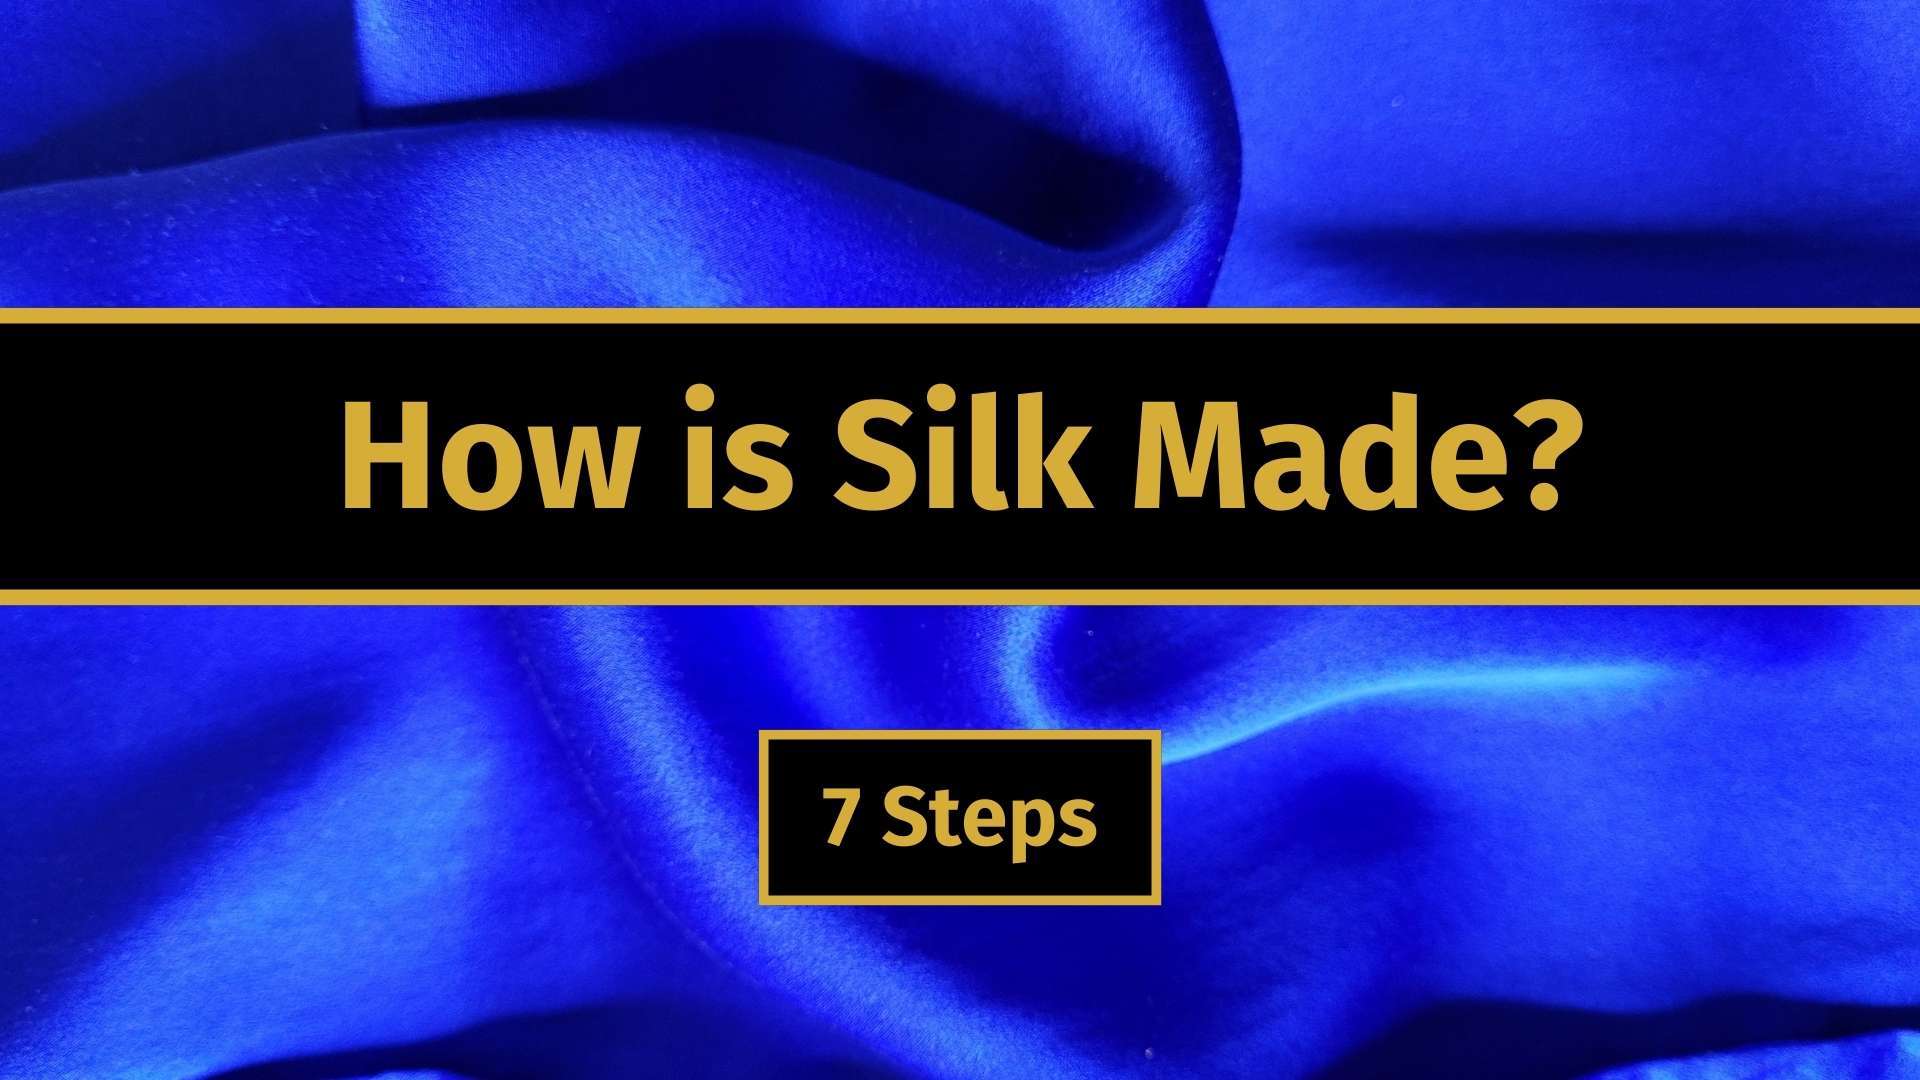 how is silk made banner image